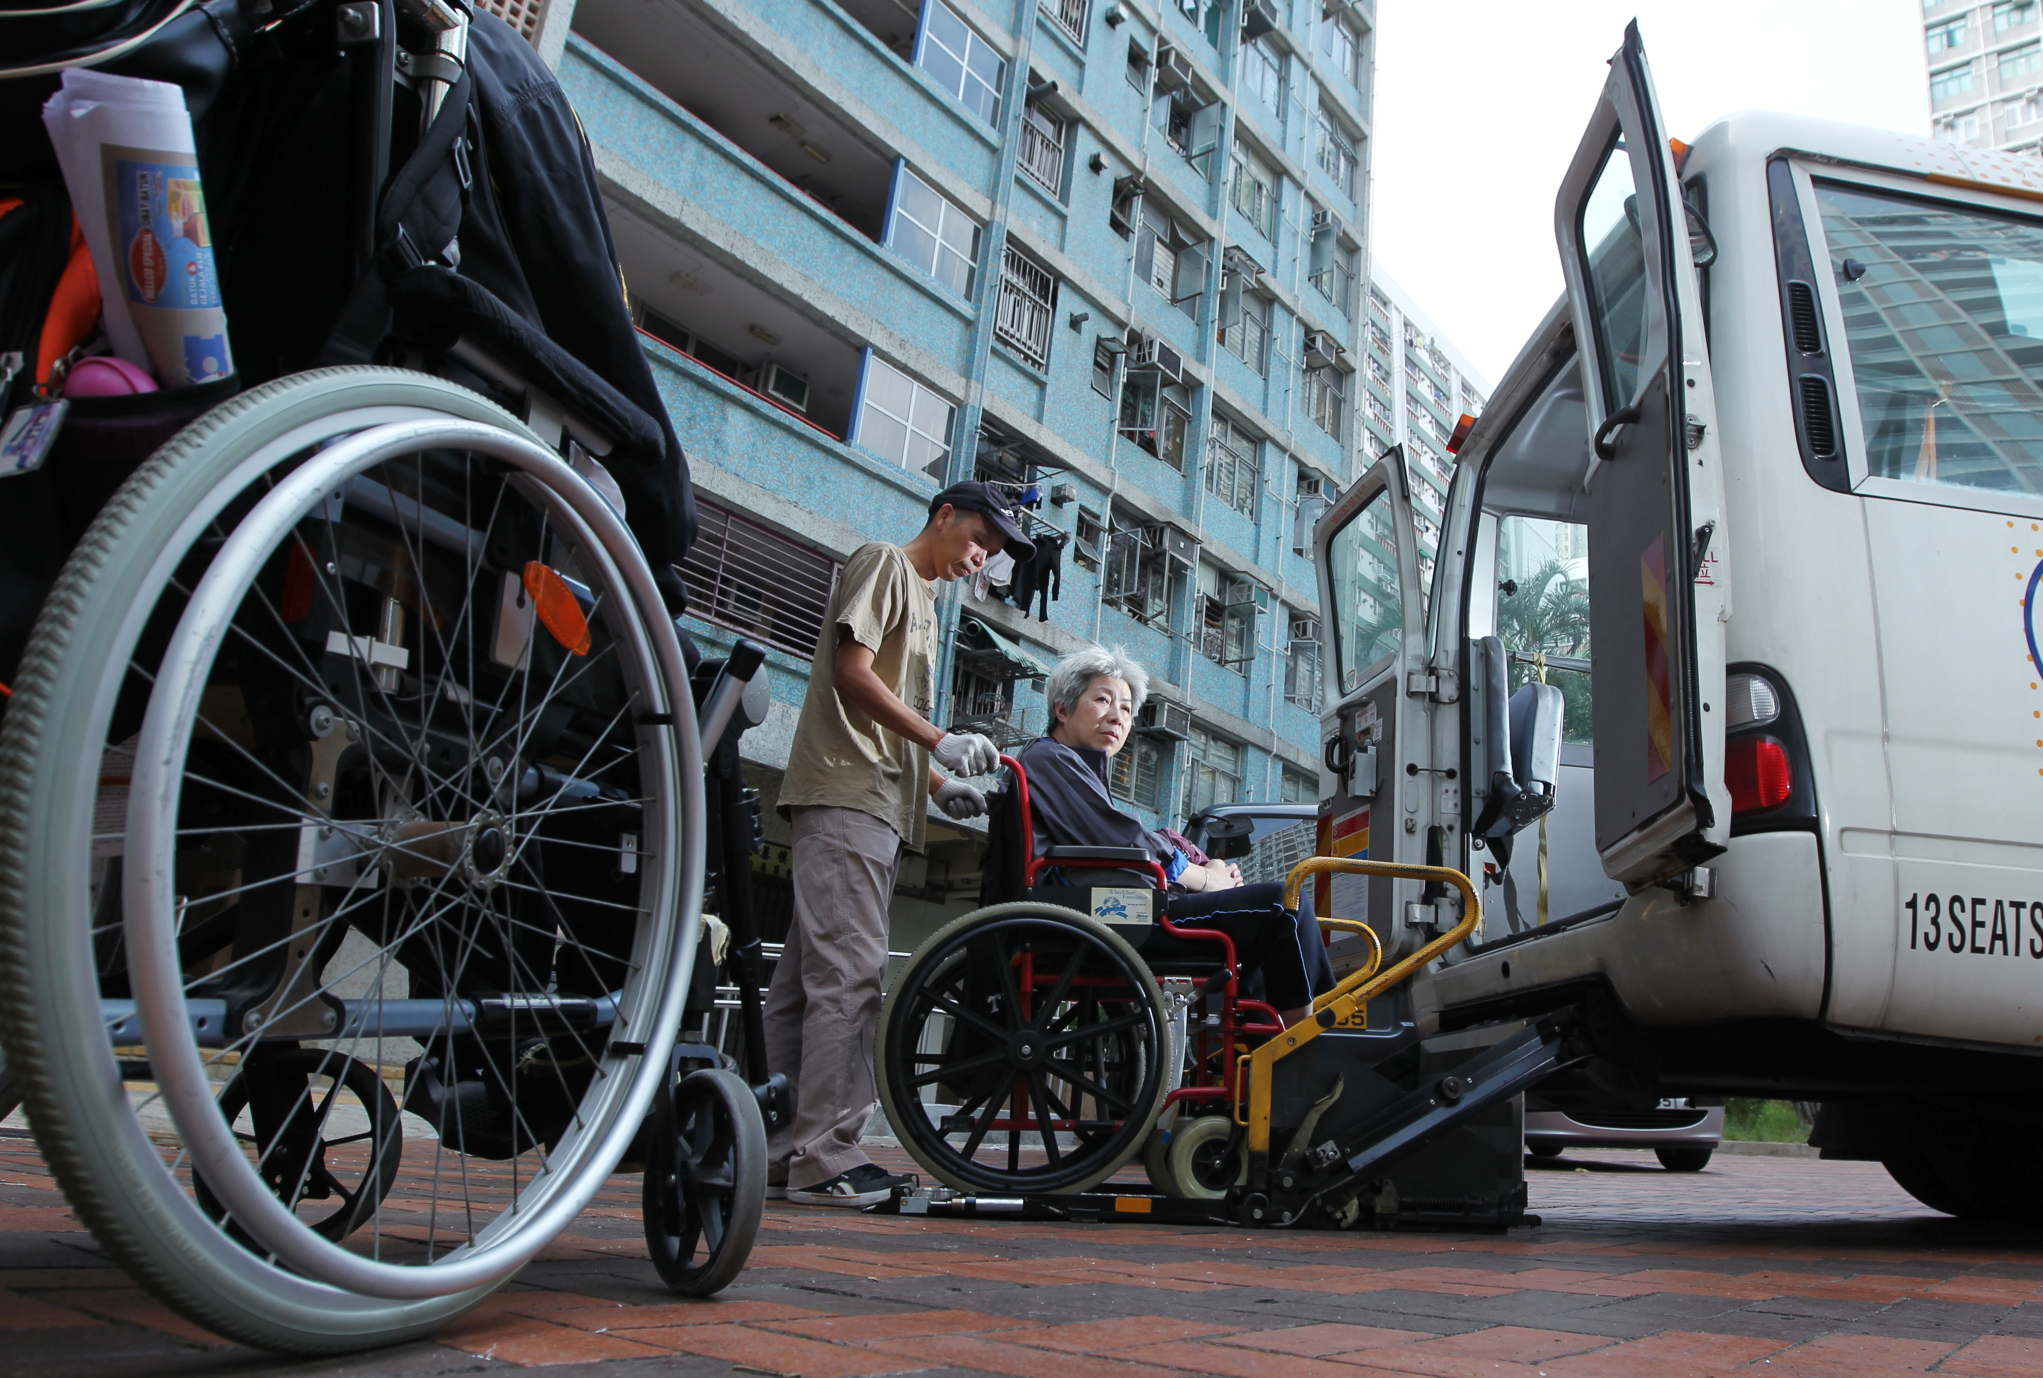 It is wrong to conceive persons with disabilities as non-productive, and even more wrong to see them as a group asking only for favours or welfare. Photo: Nora Tam